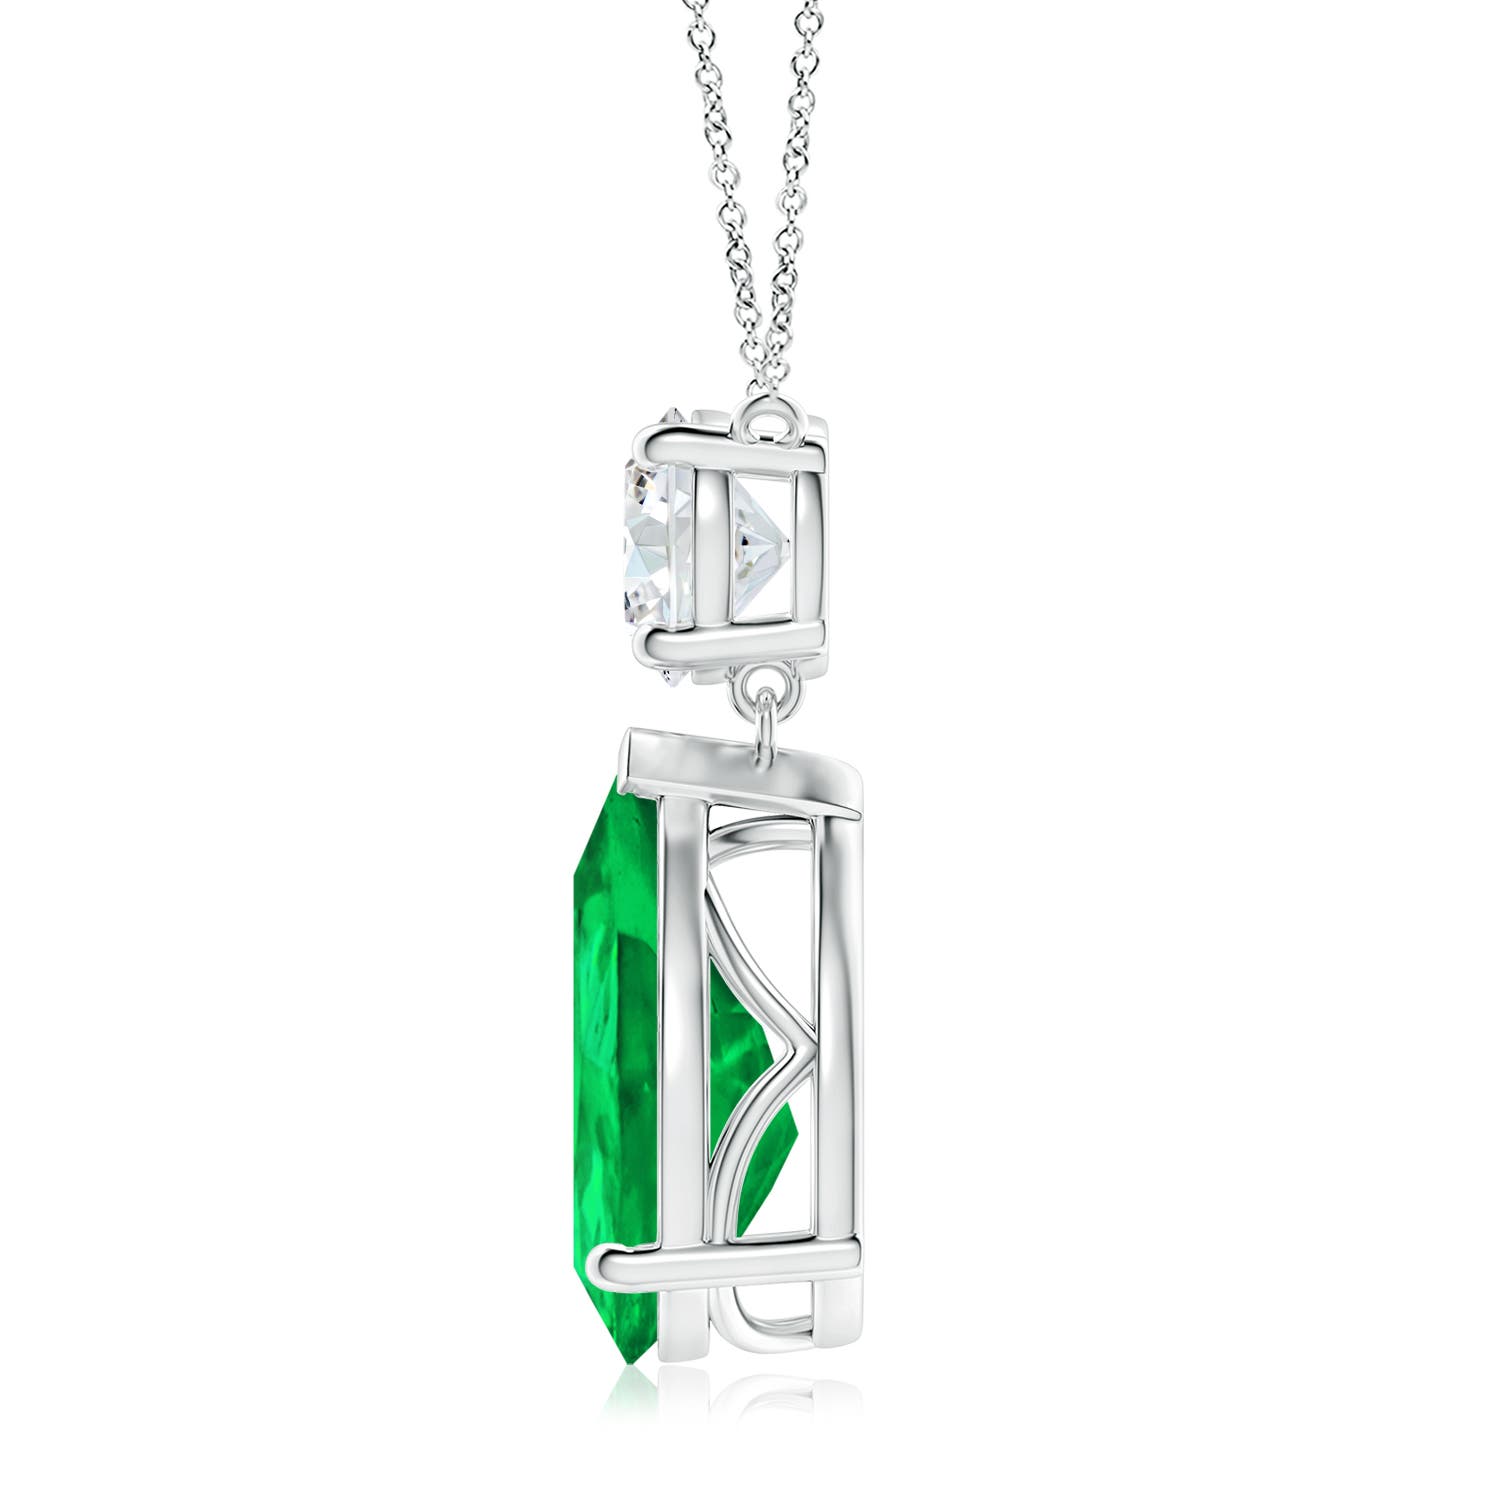 AAA - Emerald / 7.6 CT / 18 KT White Gold